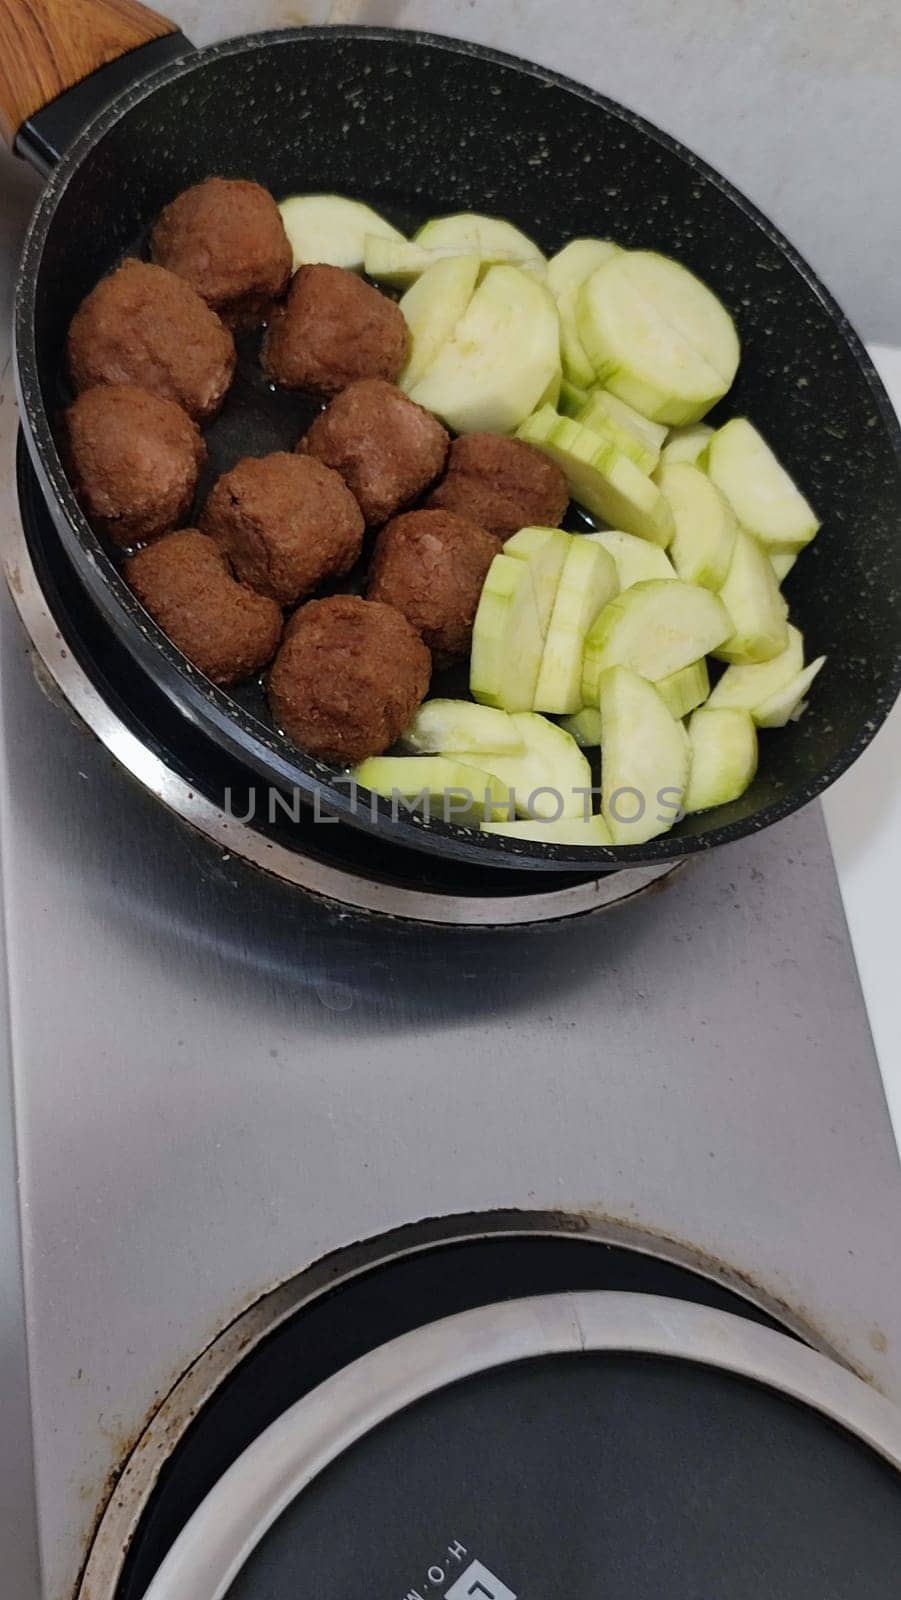 zucchini and cutlets meatballs in a frying pan, homemade food, cooking. High quality photo